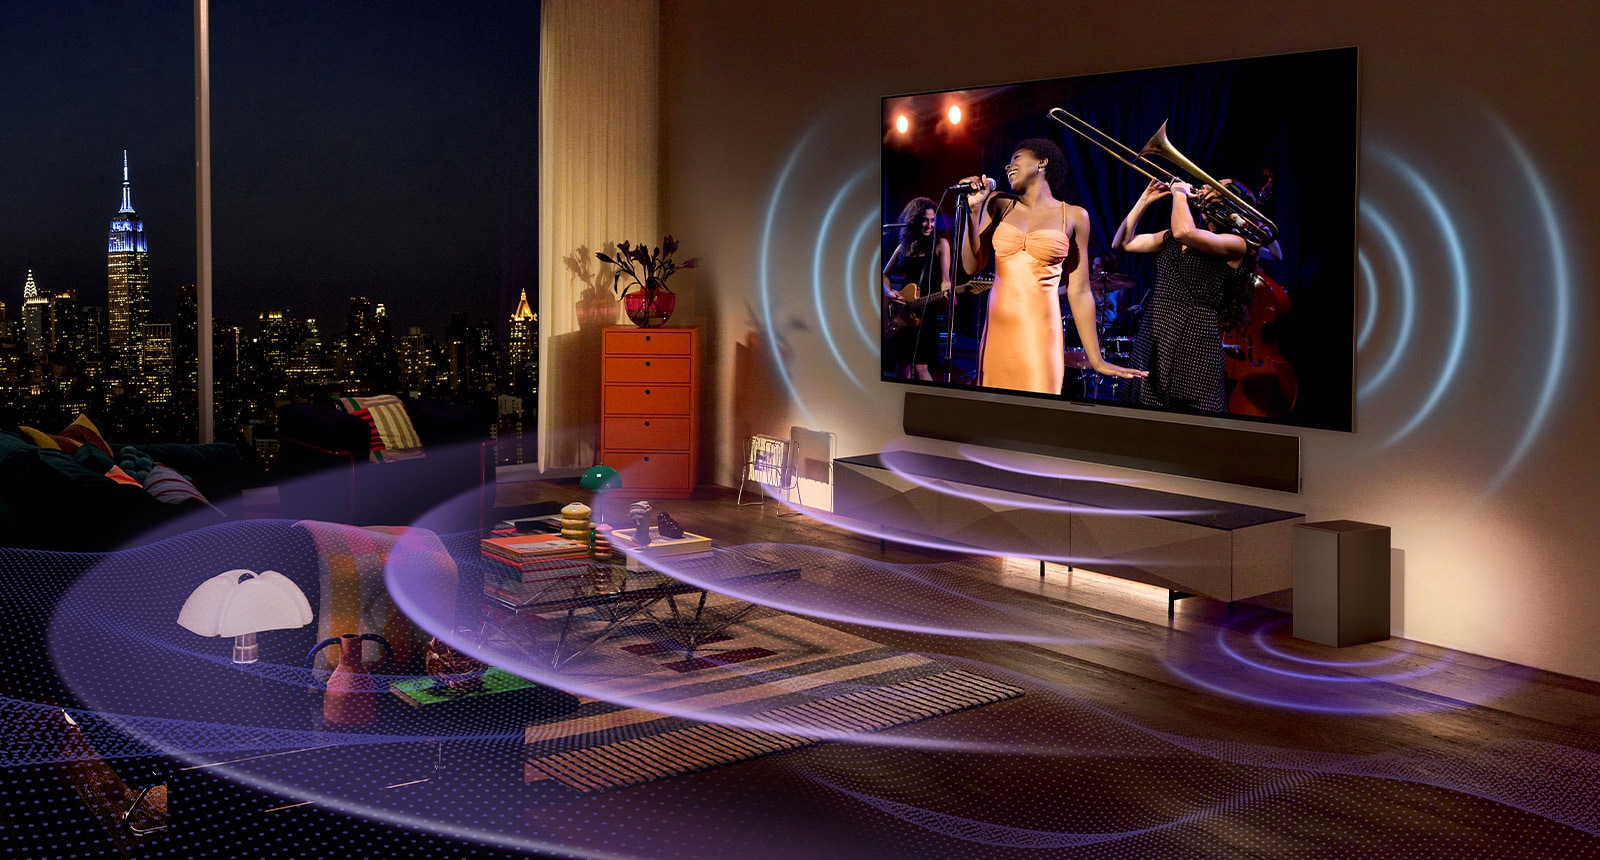 An image of an LG OLED TV in a room showing a music concert. Blue curved lines depicting TV sound and purple curved lines expressing Soundbar sound fill the space.